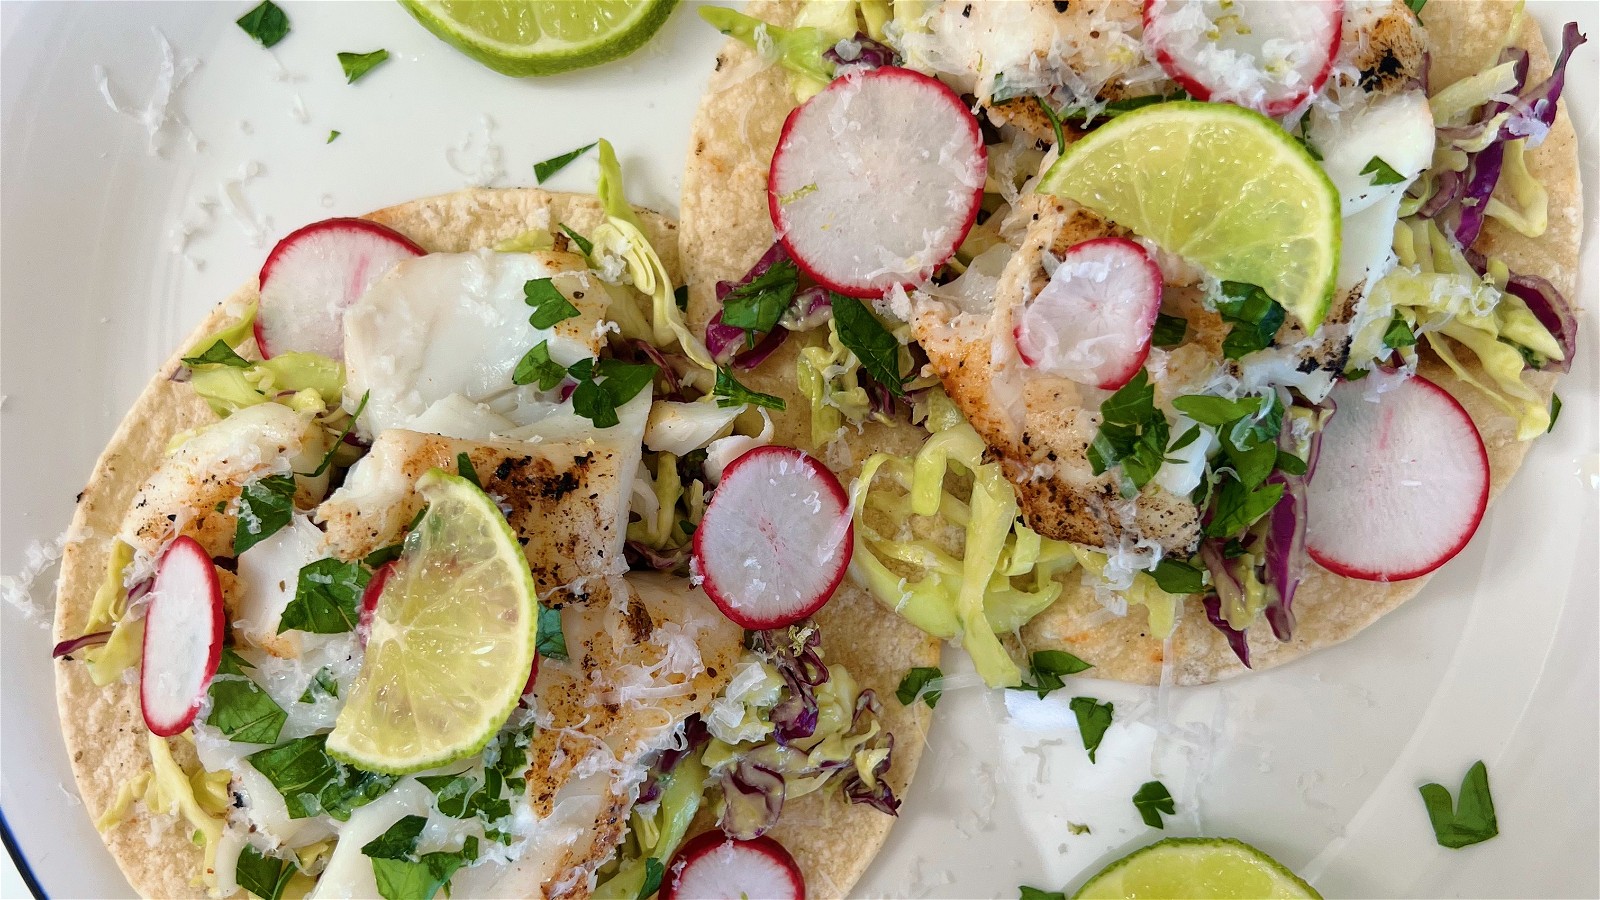 Image of Grilled Halibut Tacos with Avocado Slaw